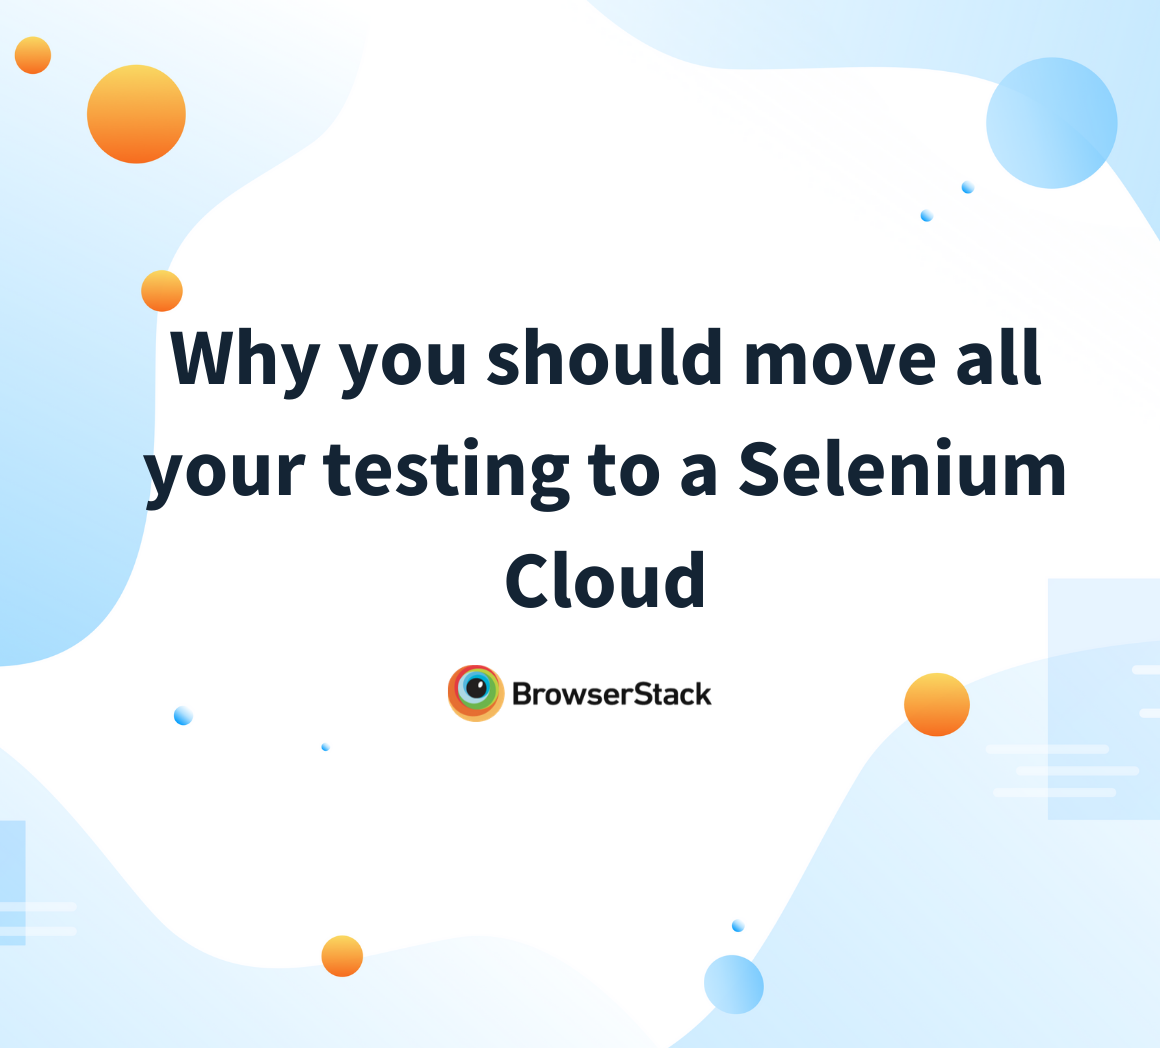 Move your testing to a Selenium Cloud